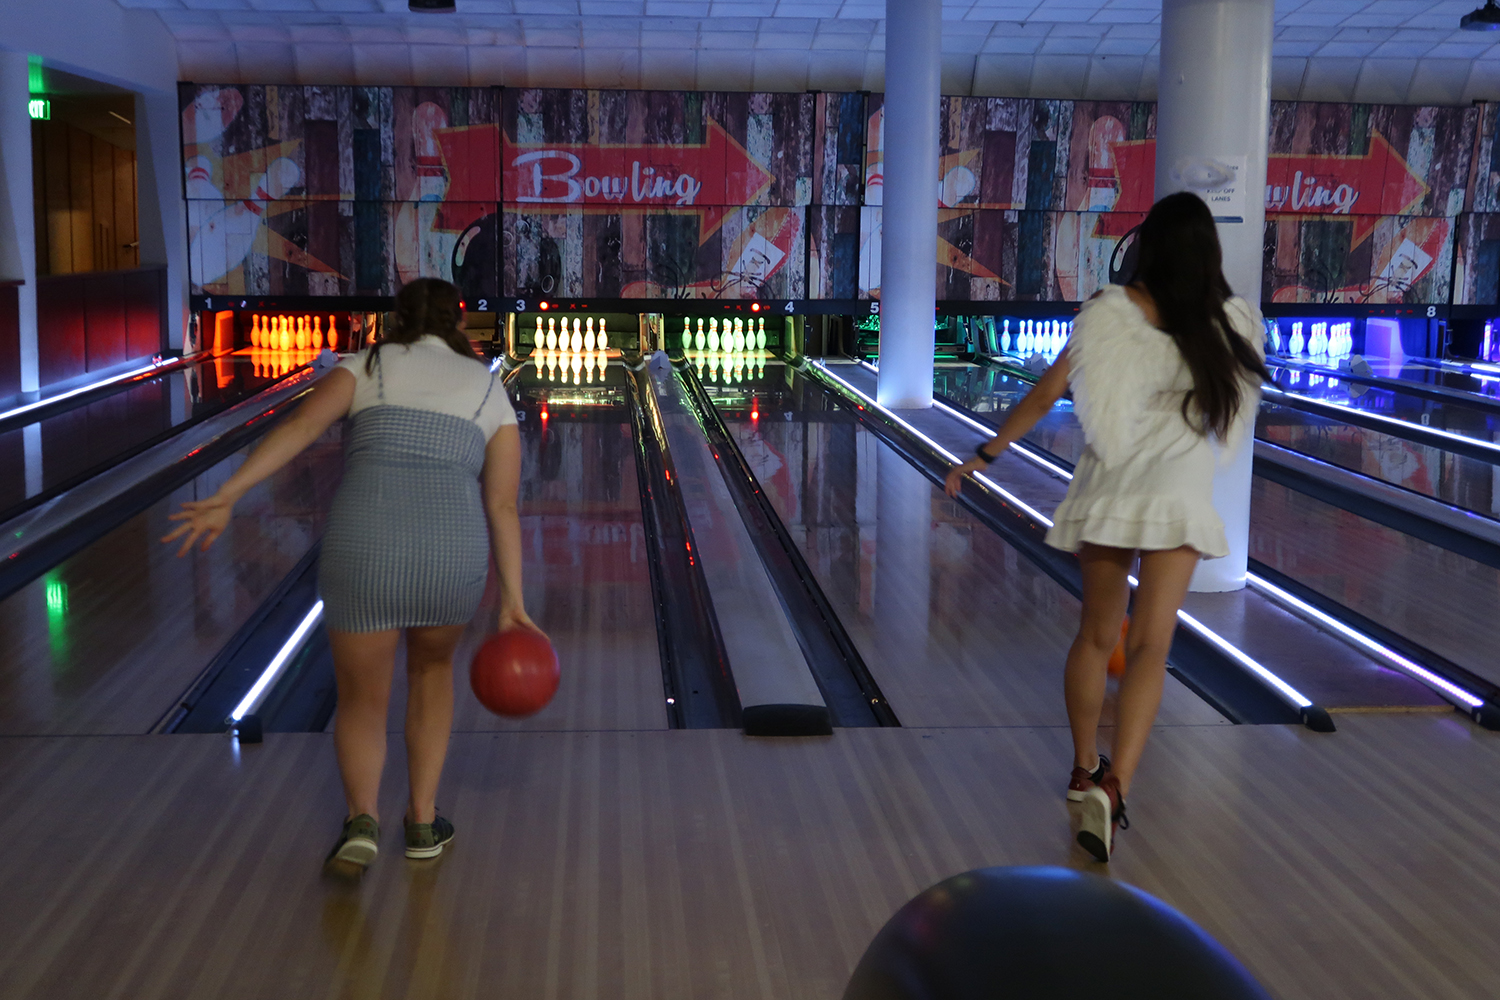 Two students throwing bowling balls in the UCD Game Room. Left student is wearing a blue plaid dress and white shirt. Right student is wearing a white dress with ruffled skirt.